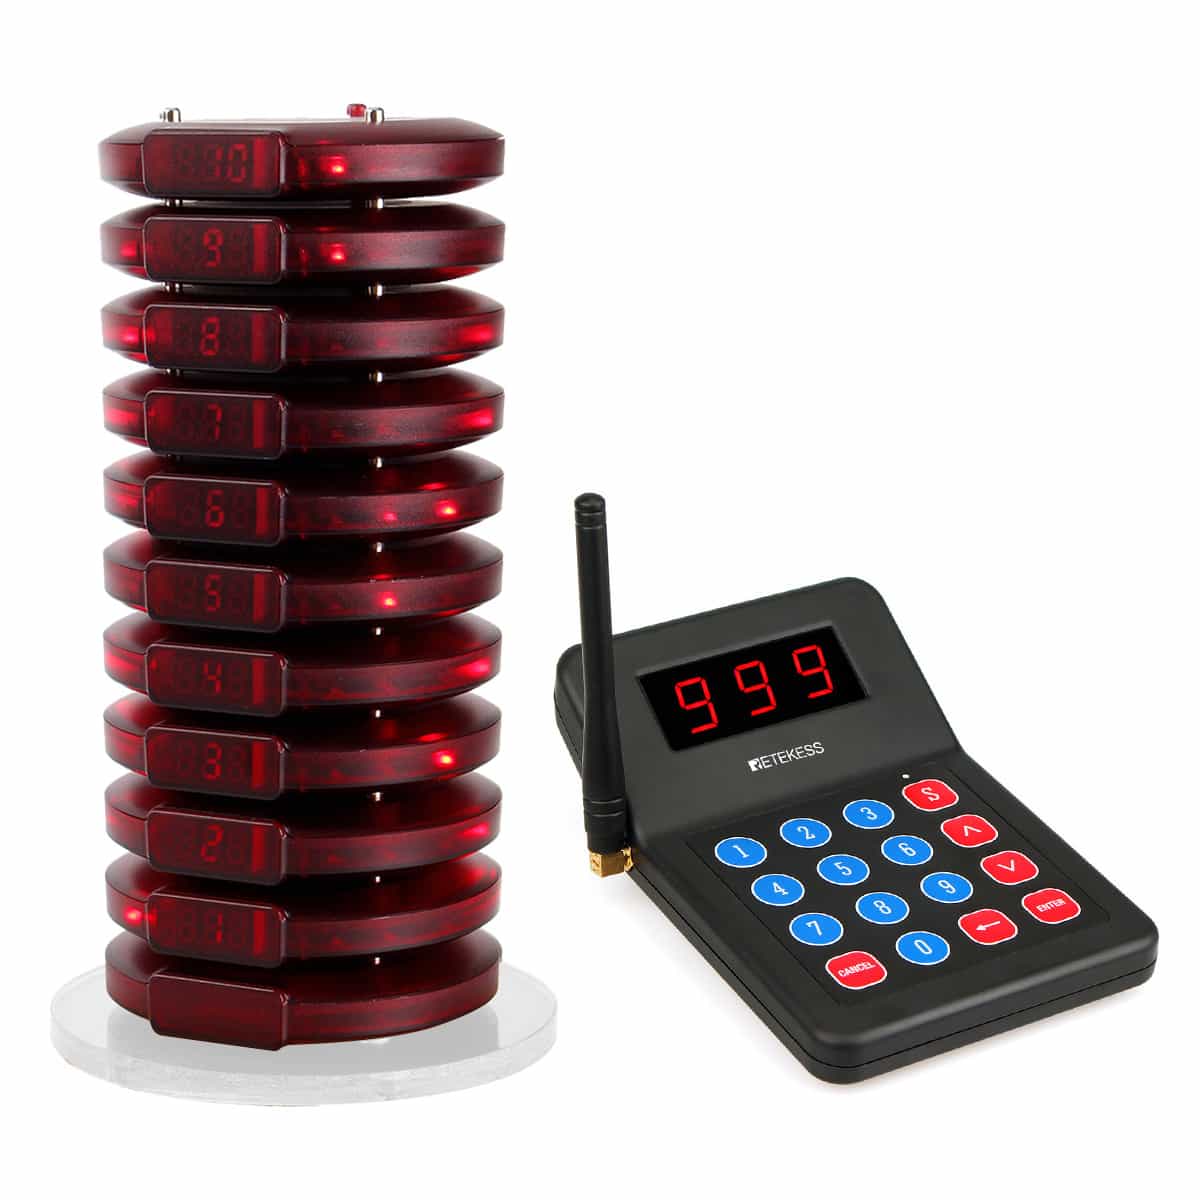 Restaurant Pagers Wireless Calling System Nursery Pager 10,20,30 Waiting Buzzers 